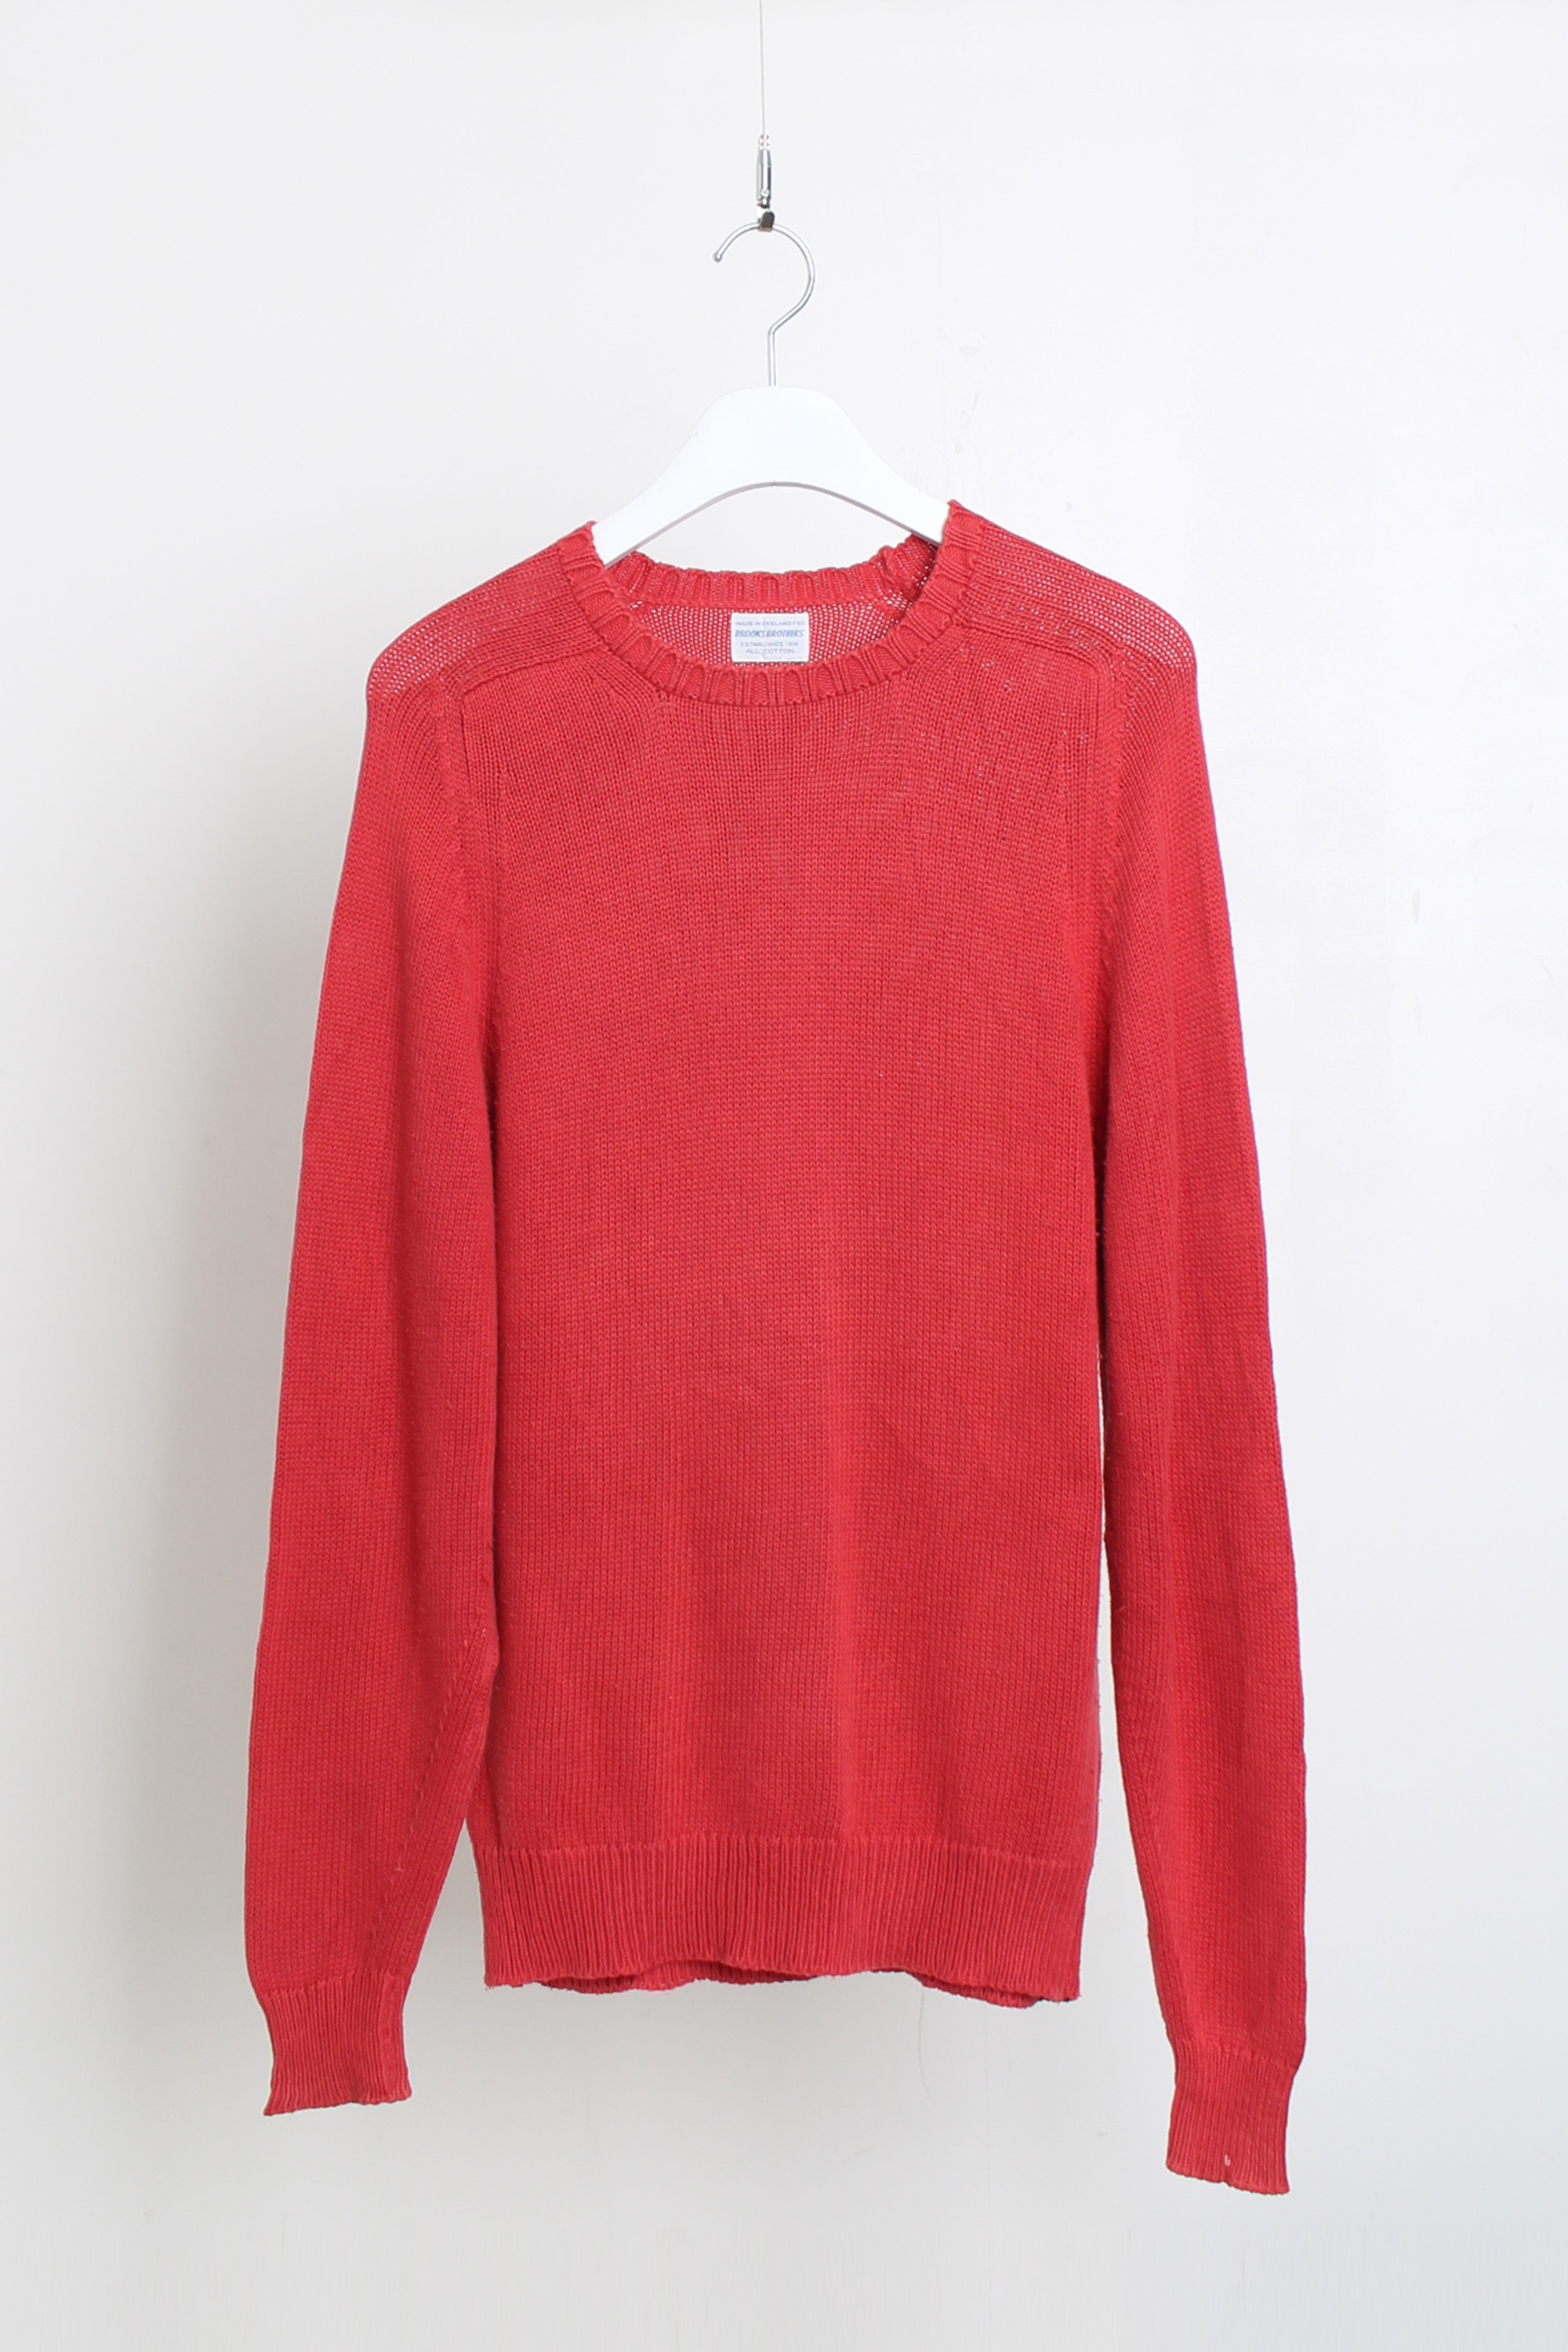 BROOKS BROTHERES round neck knit